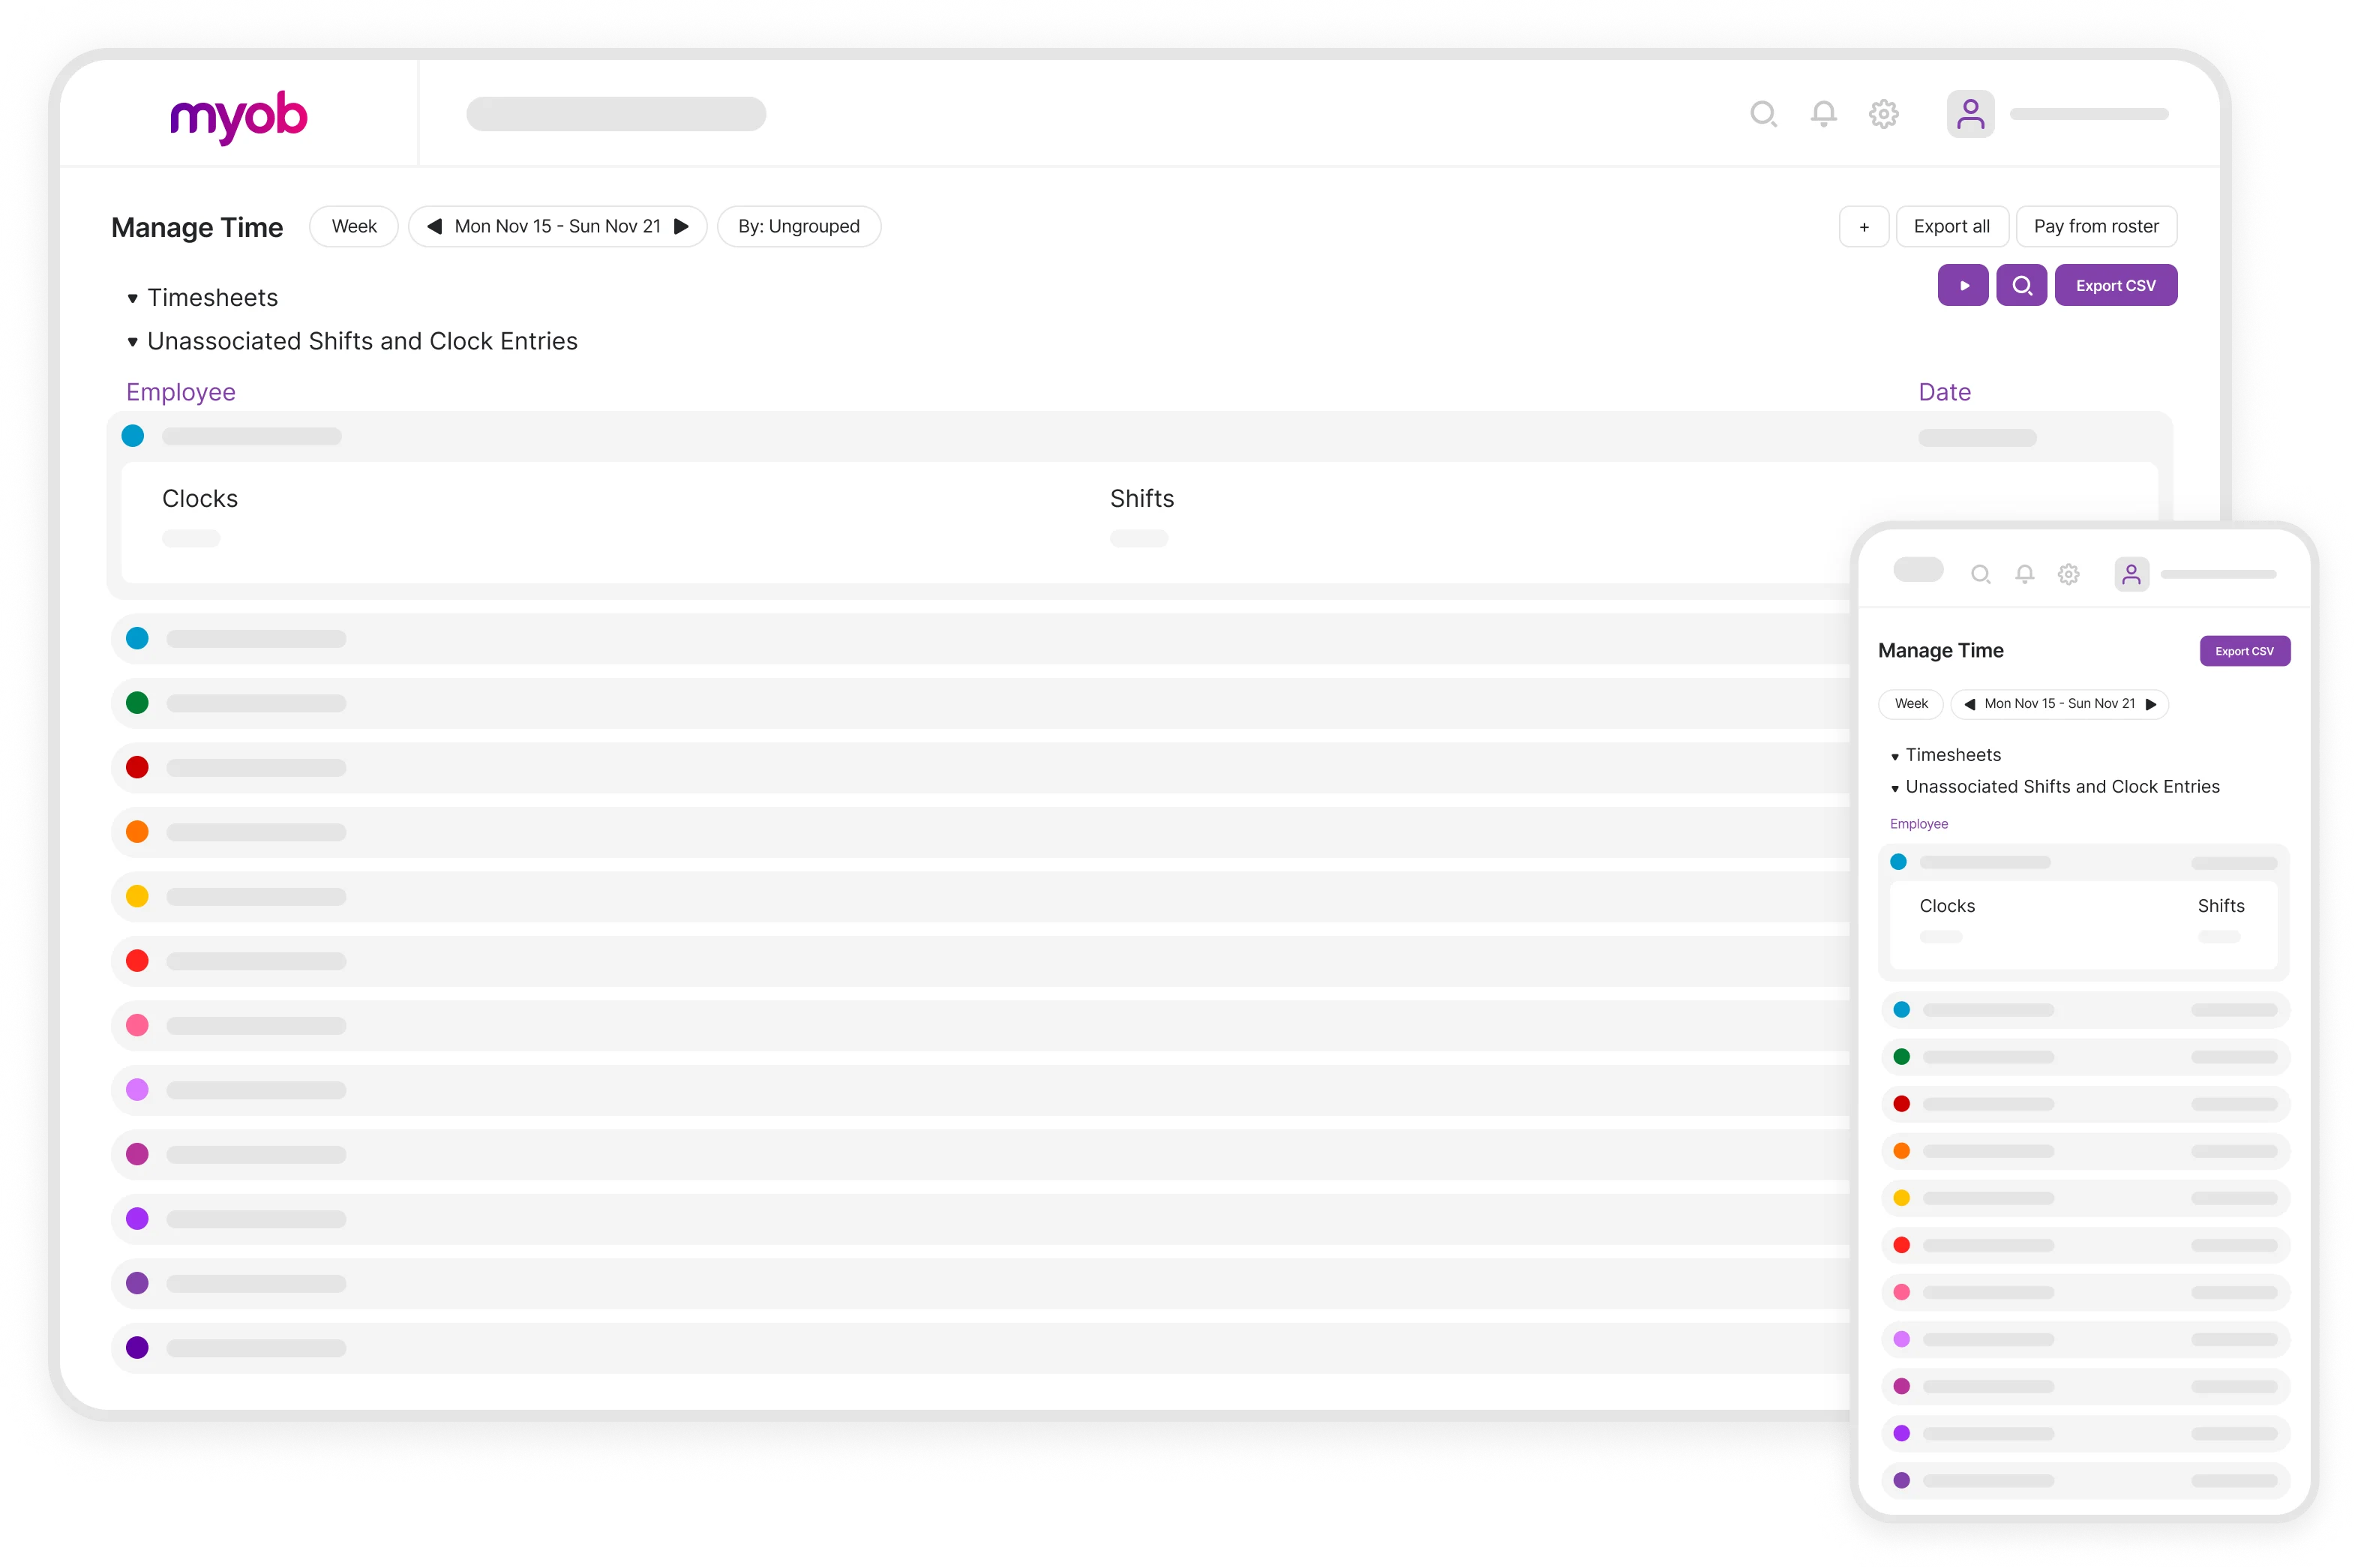 The manage time dashboard shows timesheets and shifts where staff clock on and off. You can view the manage time dashboard on mobile and desktop devices.